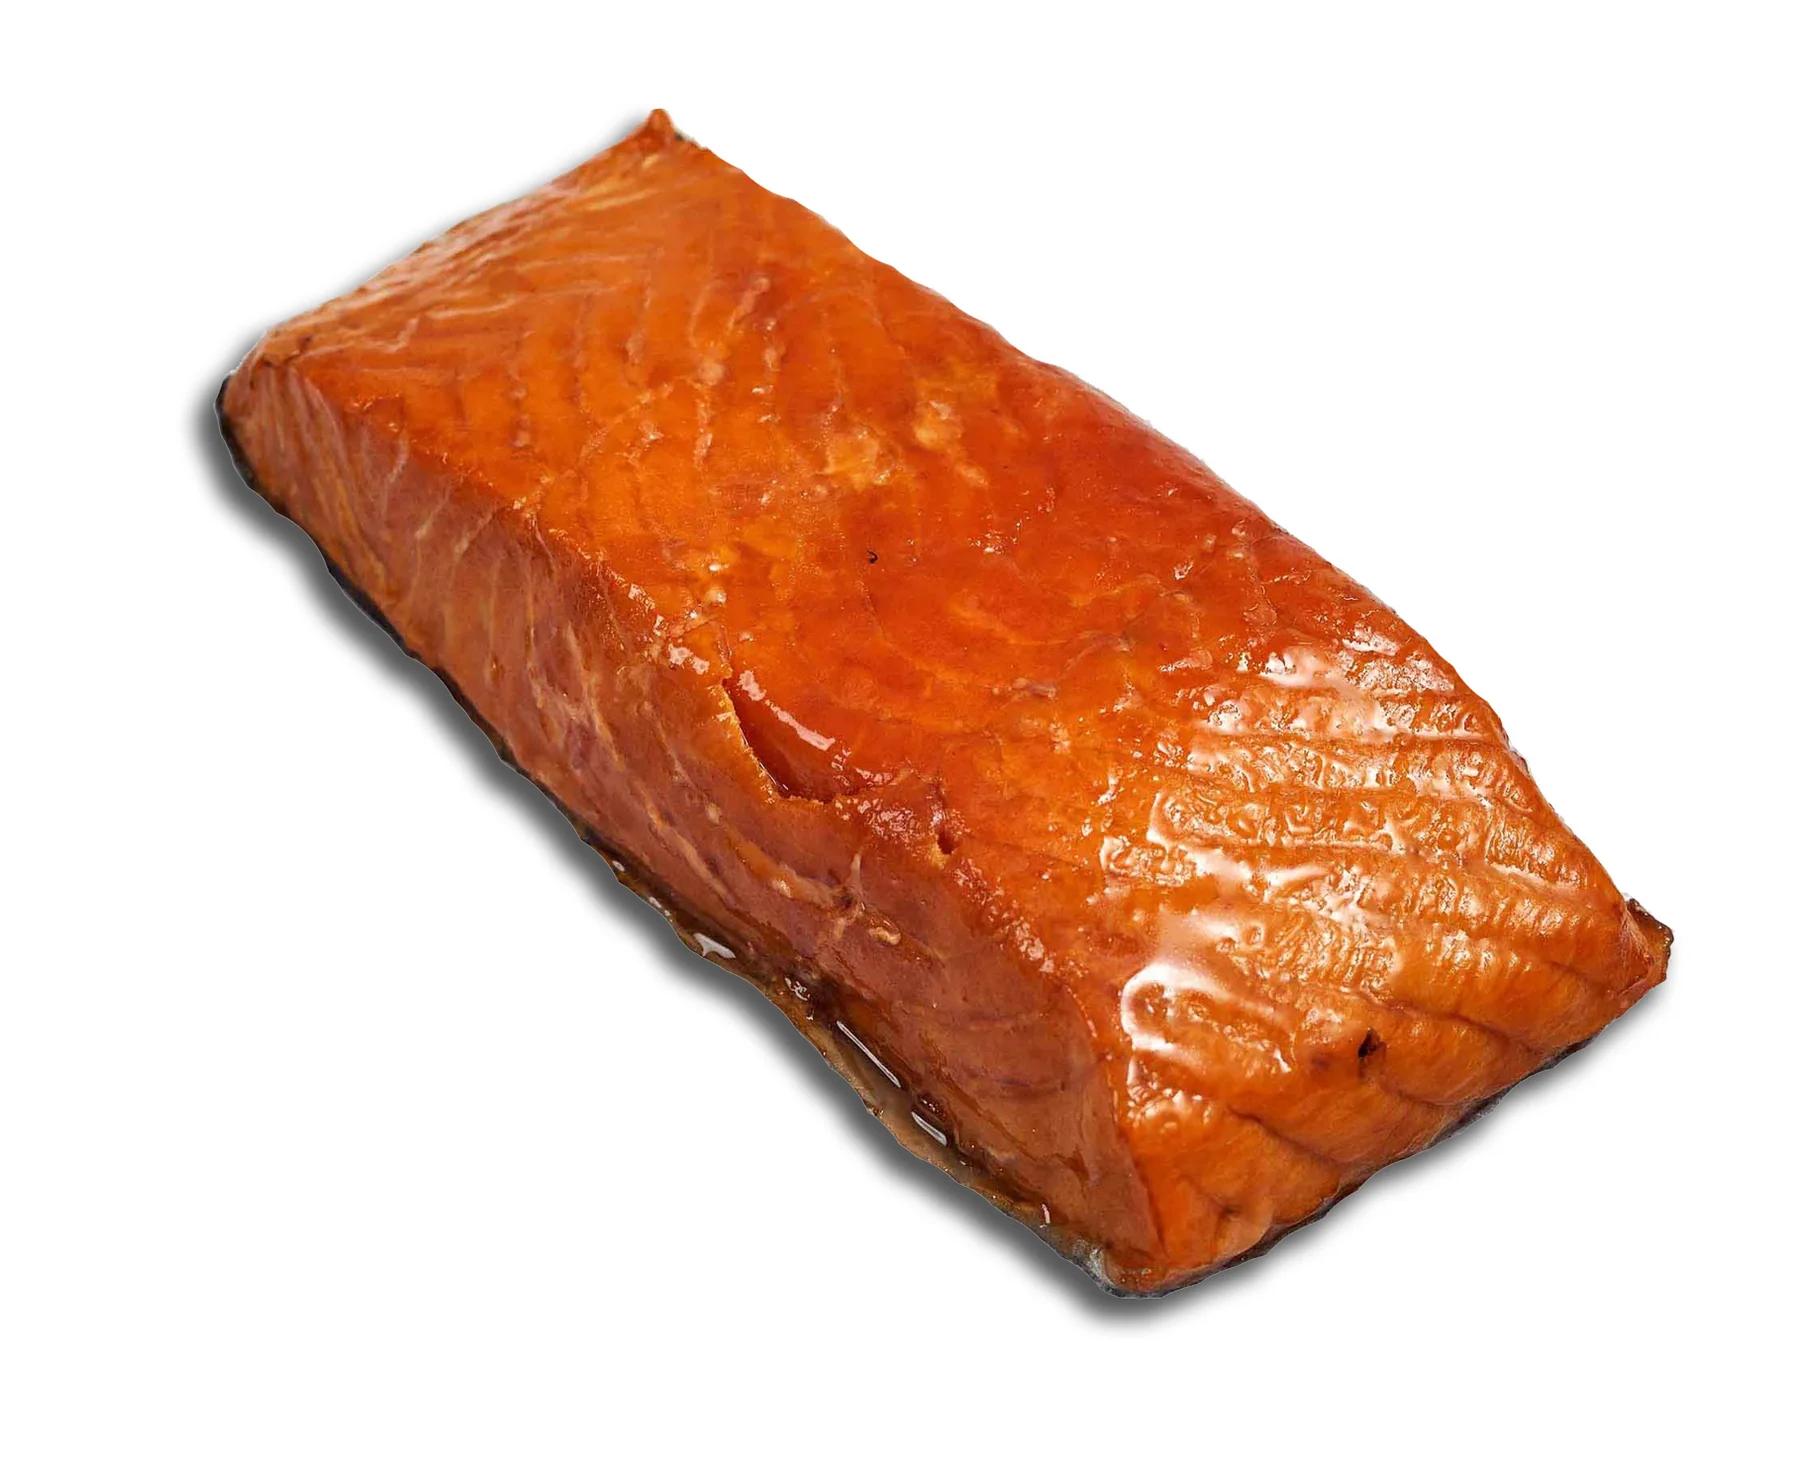 oak smoked salmon - What's the best wood to use to smoke salmon